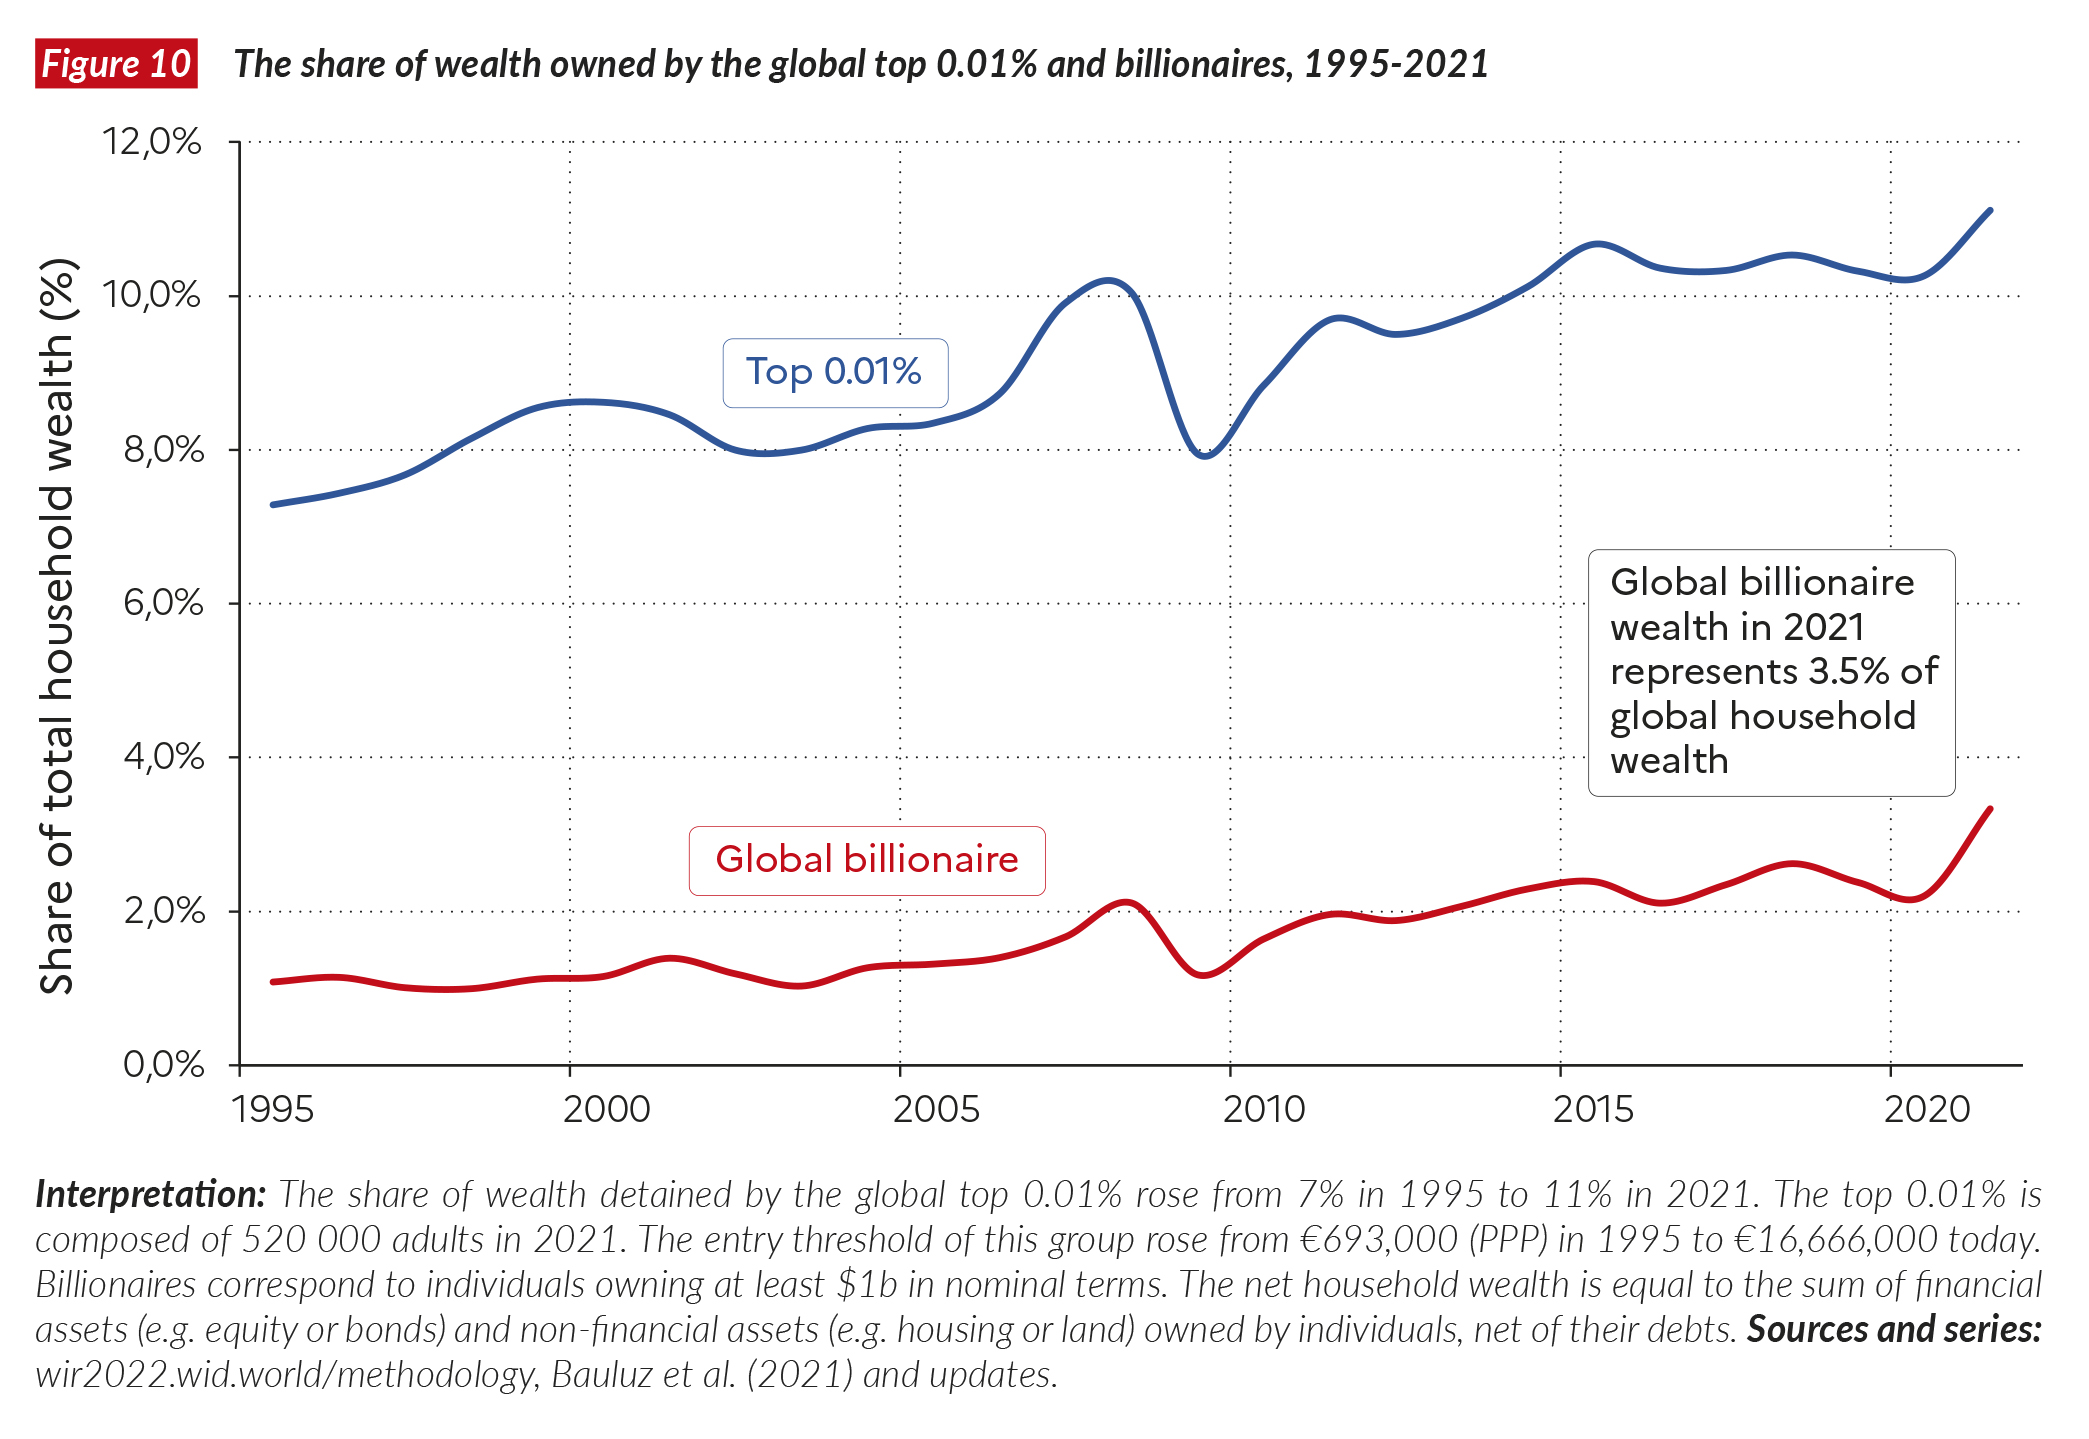 Share of wealth owned by the global top 0.01 percent and billionaires, 1995-2021. The wealth of the richest individuals on Earth has grown at 6 to 9 percent per year since 1995, whereas average wealth has grown at 3.2 percent per year. Since 1995, the share of global wealth possessed by billionaires has risen from 1 percent to more than 3 percent. 2020 marked the steepest increase in global billionaires’ share of wealth on record. Data: World Inequality Report 2022. Graphic: World Inequality Lab